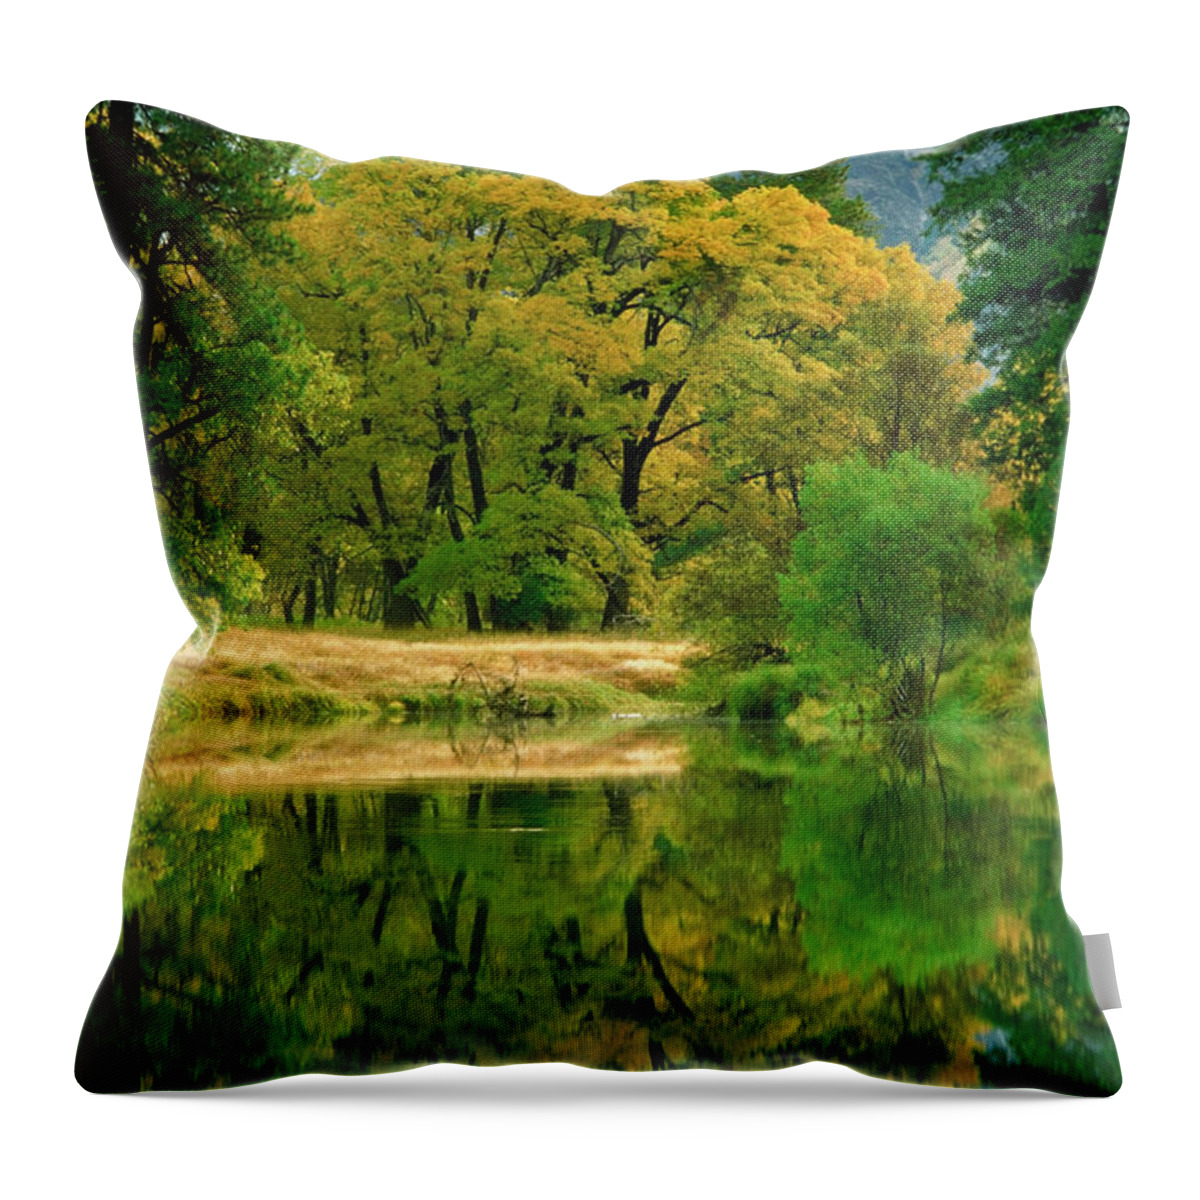 Scenics Throw Pillow featuring the photograph Reflection Of Trees In Merced River by Medioimages/photodisc